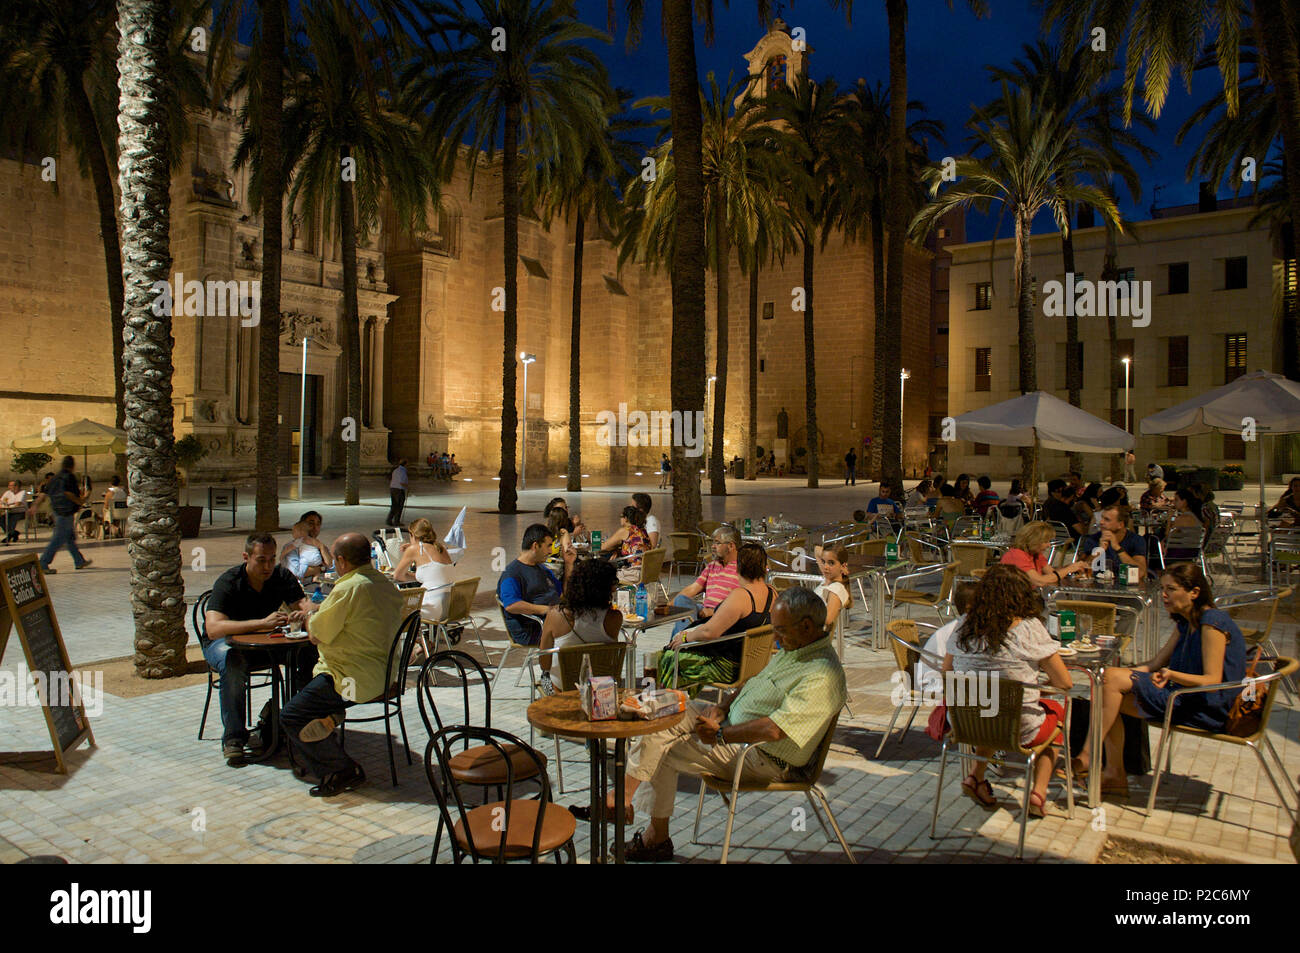 Plaza in front of the cathedral with palm trees and people at tables lit in the evening, Almeria, Andalusia, Spain Stock Photo